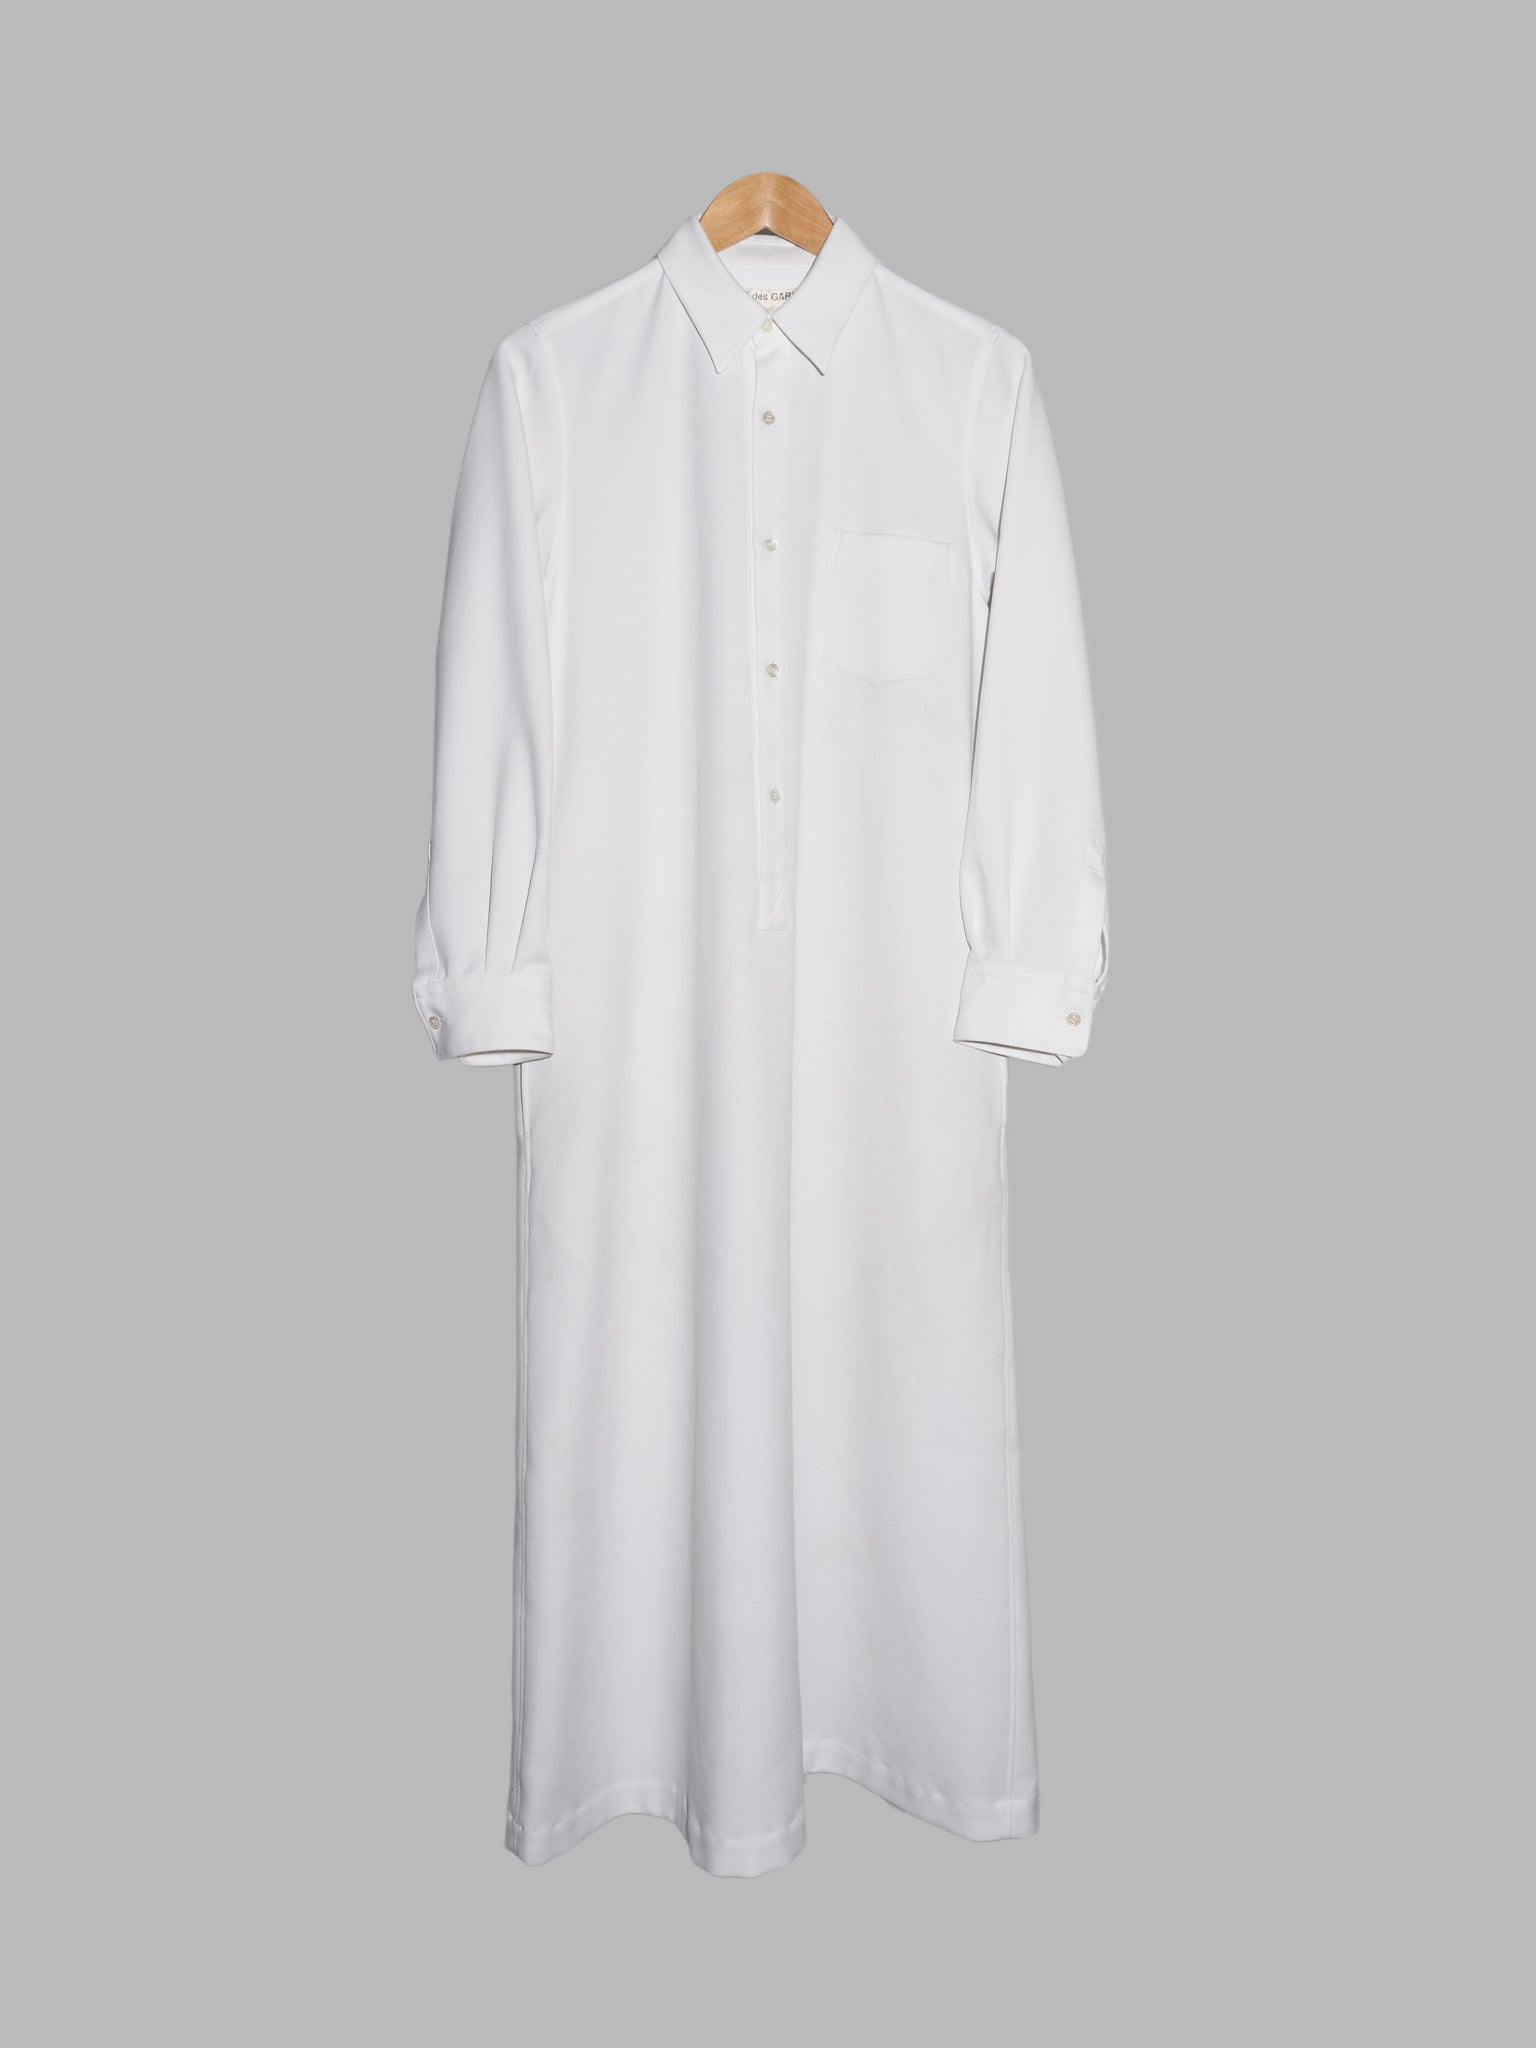 Comme des Garcons AW1995 "Sweeter than Sweet" white maxi pullover shirt dress M